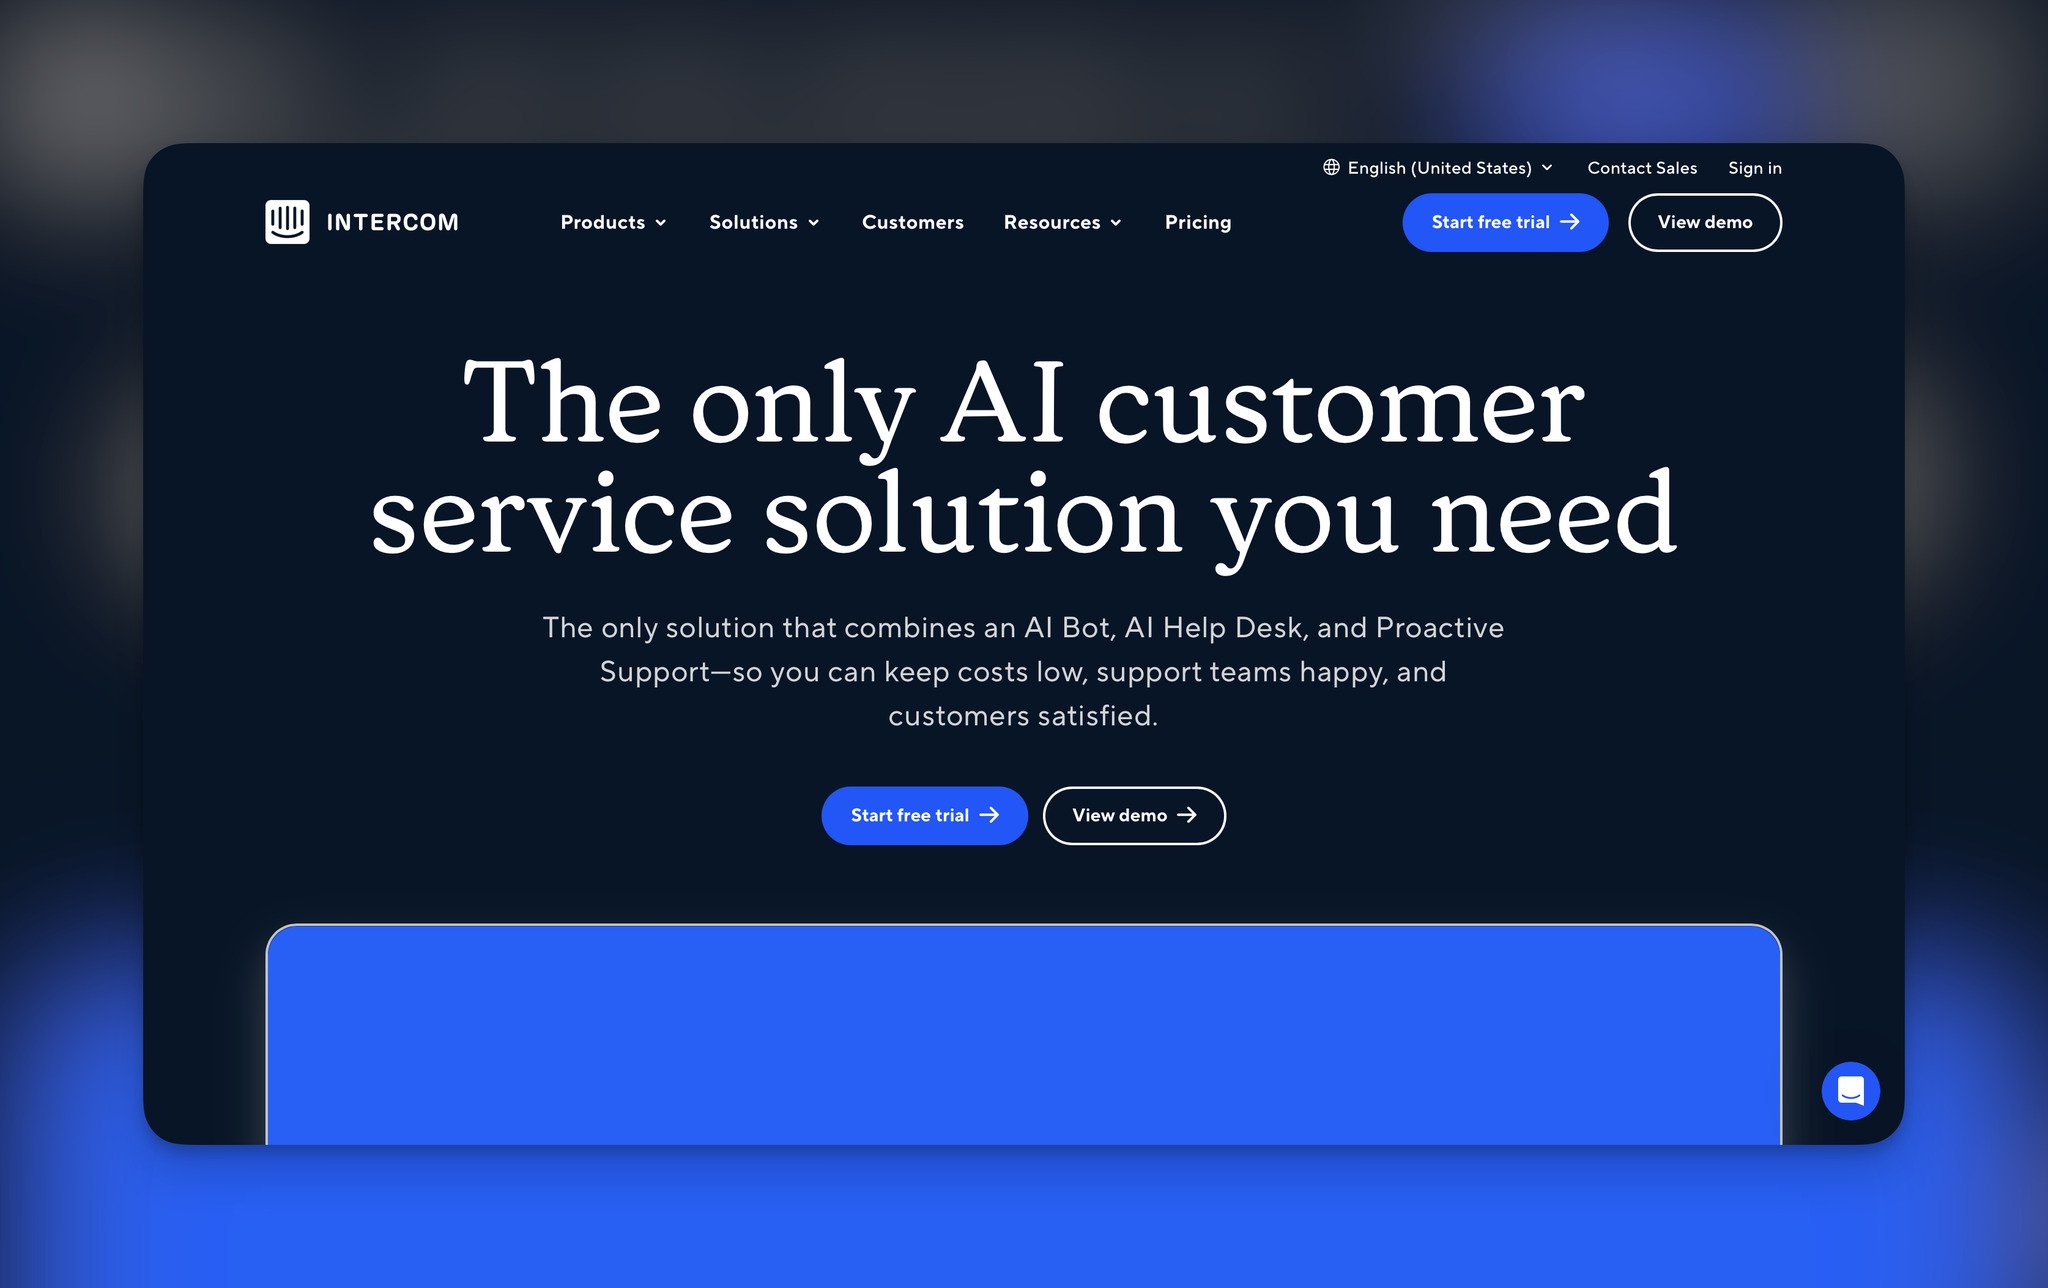 Intercom's homepage with the headline "The only AI customer service solution you need" followed by "Start free trial" and "View demo" buttons